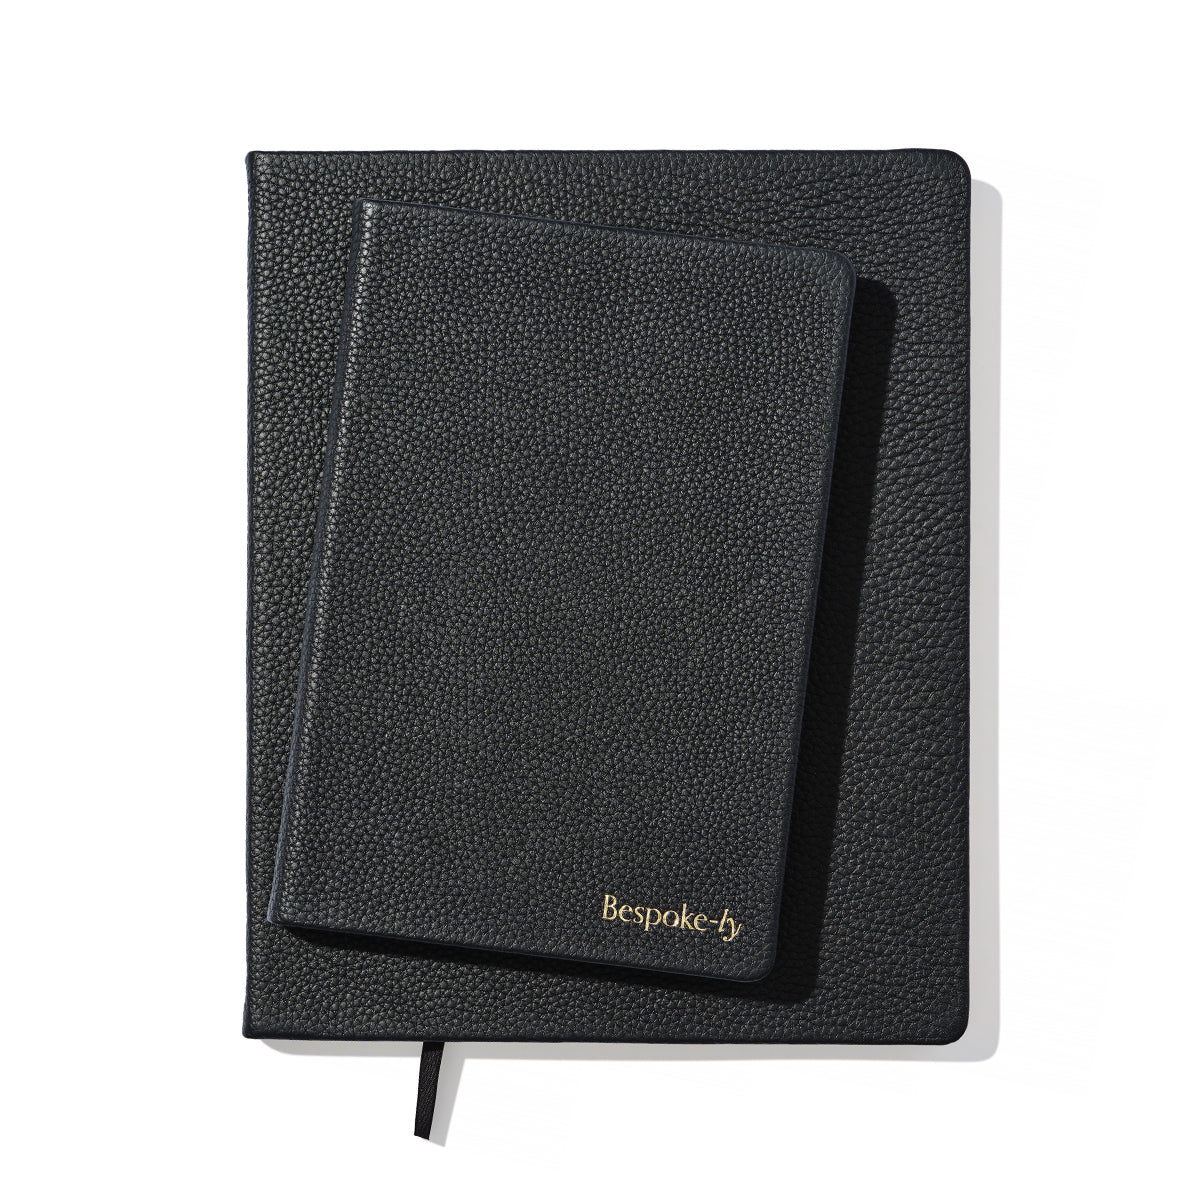 Leather-Notebooks-Bespokely-12-12_73d60ba5-be55-4e85-bd63-1f5c42ae07fd.jpg